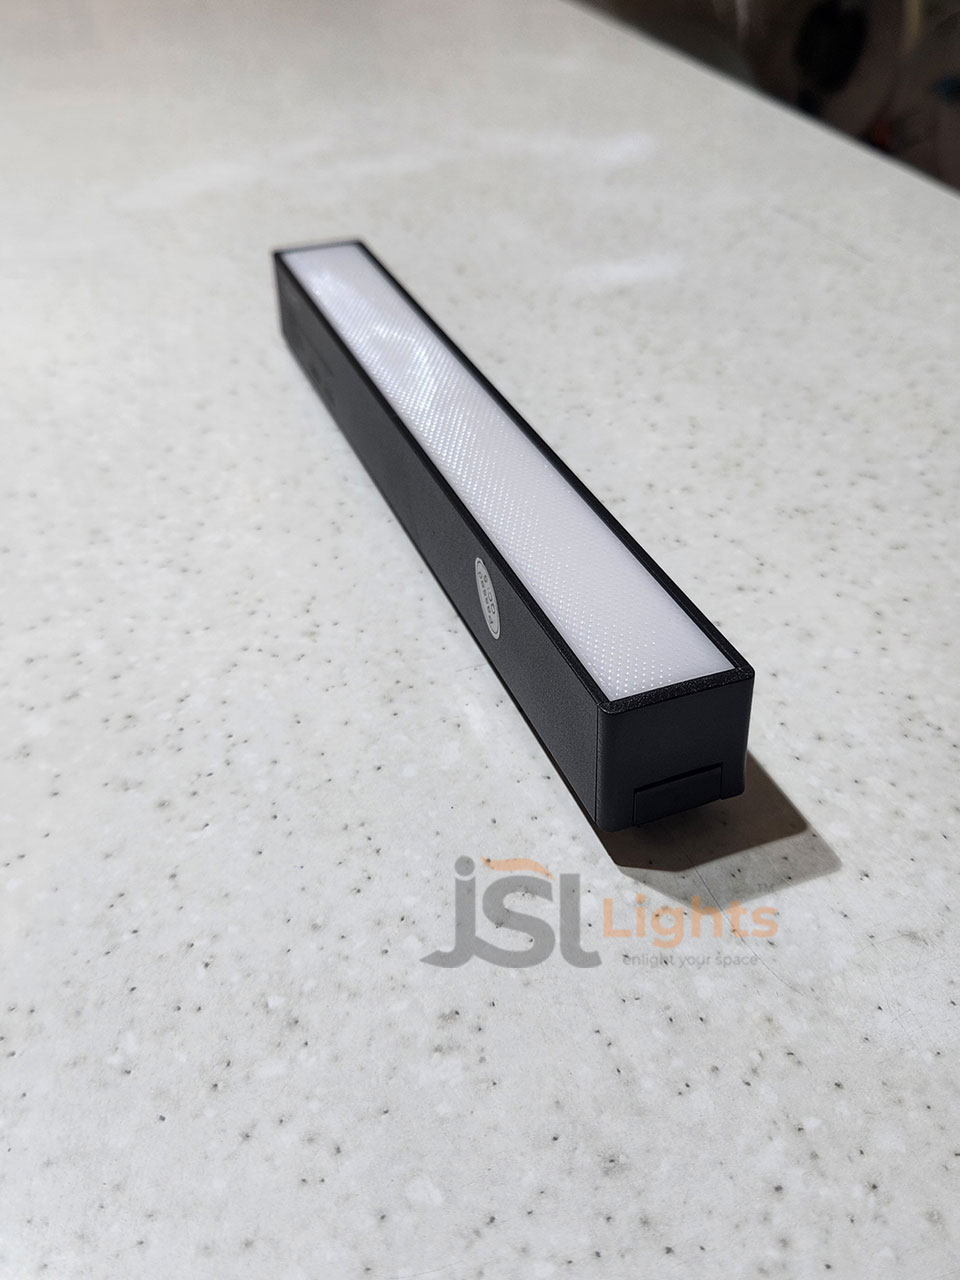 Apra 12W Ultra Thin Linear Diffused Magnetic Track Light MG01 SMD Diffuser Linear Ultra Slim Magnetic Track Light with Black Body